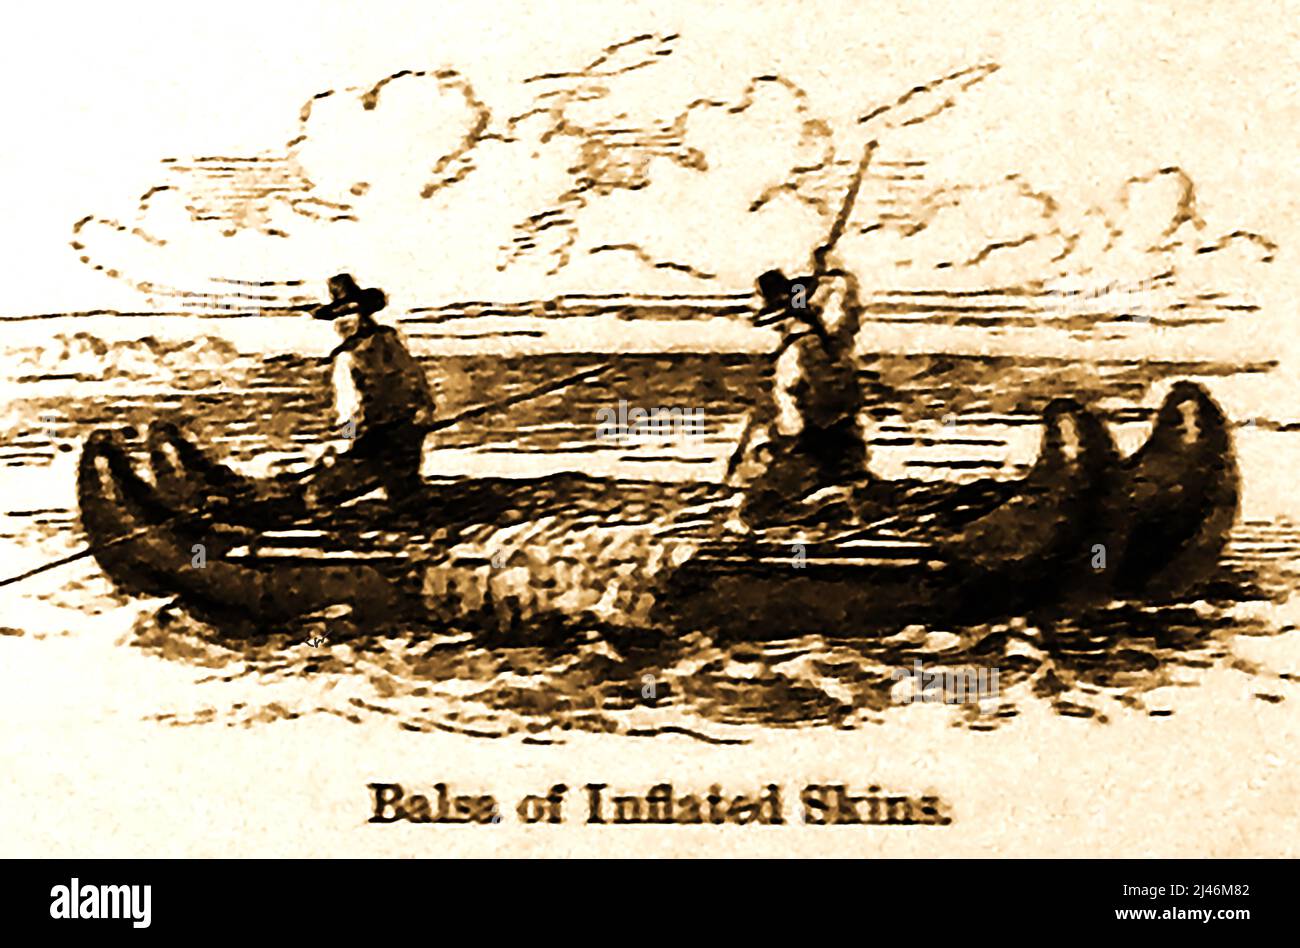 A 19th century illustration of a South American BALSA raft or canoe made from inflated skins NOT  balsa wood. The catamaran style boat had two hulls with a platform between which was used for carrying people or goods. Stock Photo